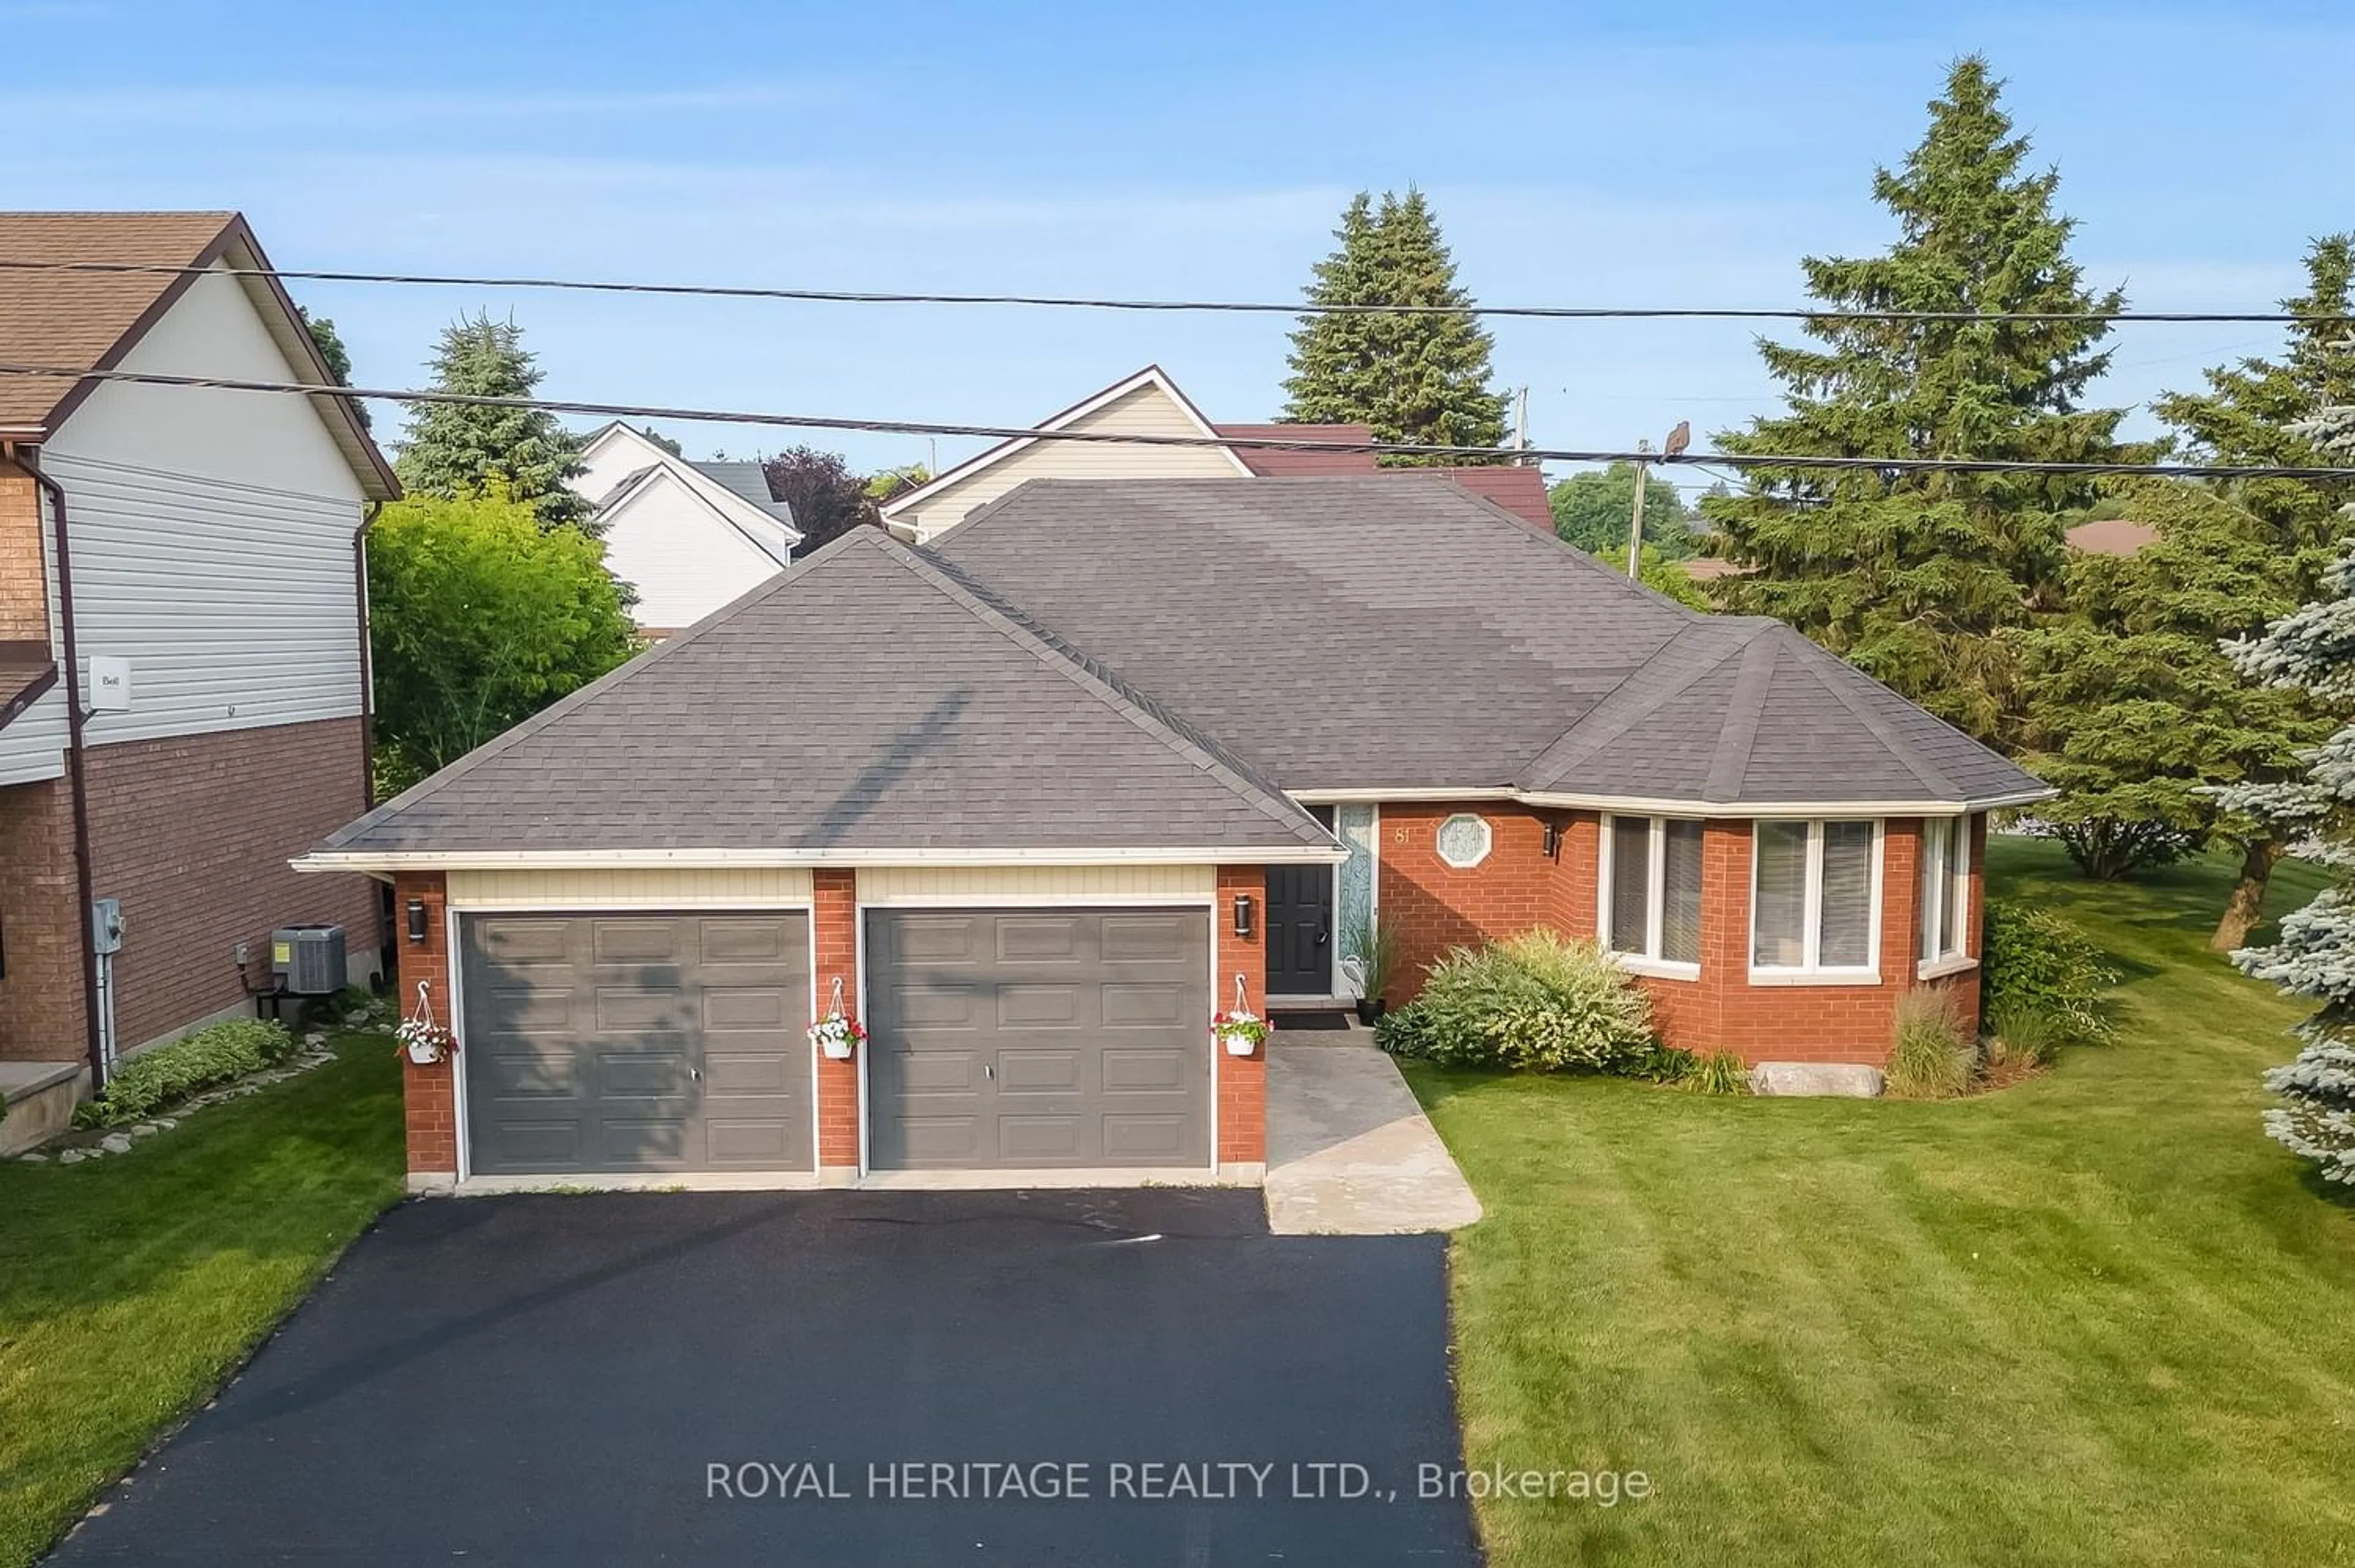 Frontside or backside of a home for 81 Pinnacle St, Brighton Ontario K0K 1H0